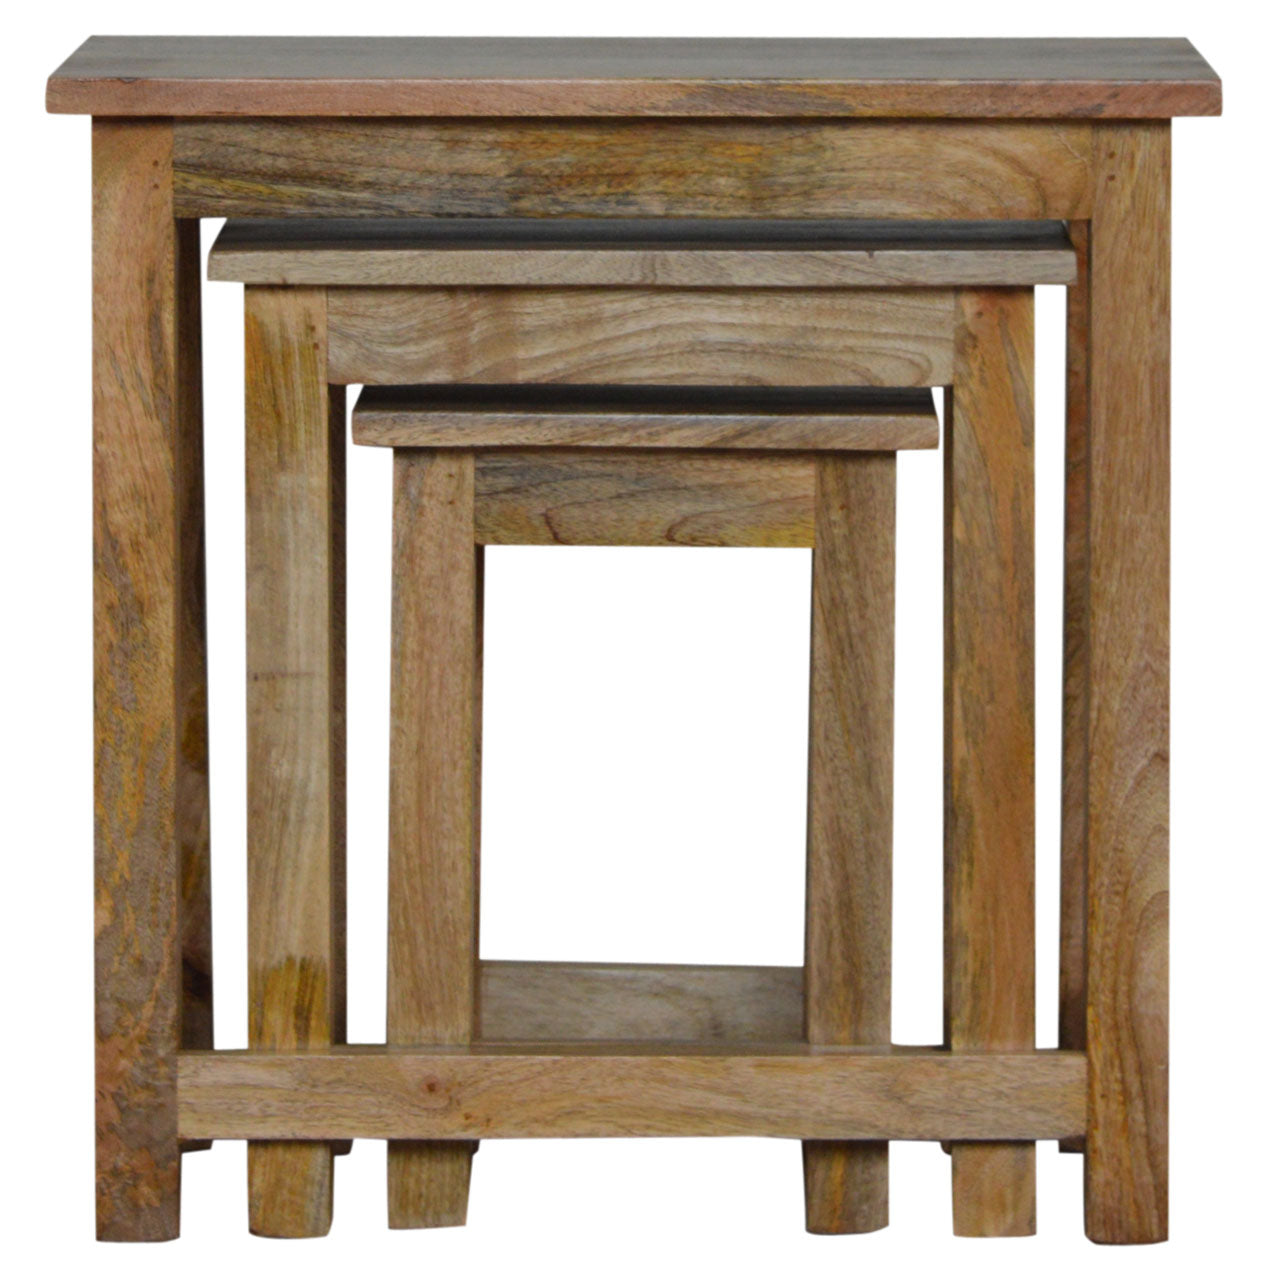 View Country Solid Wood Stool Set of 3 information